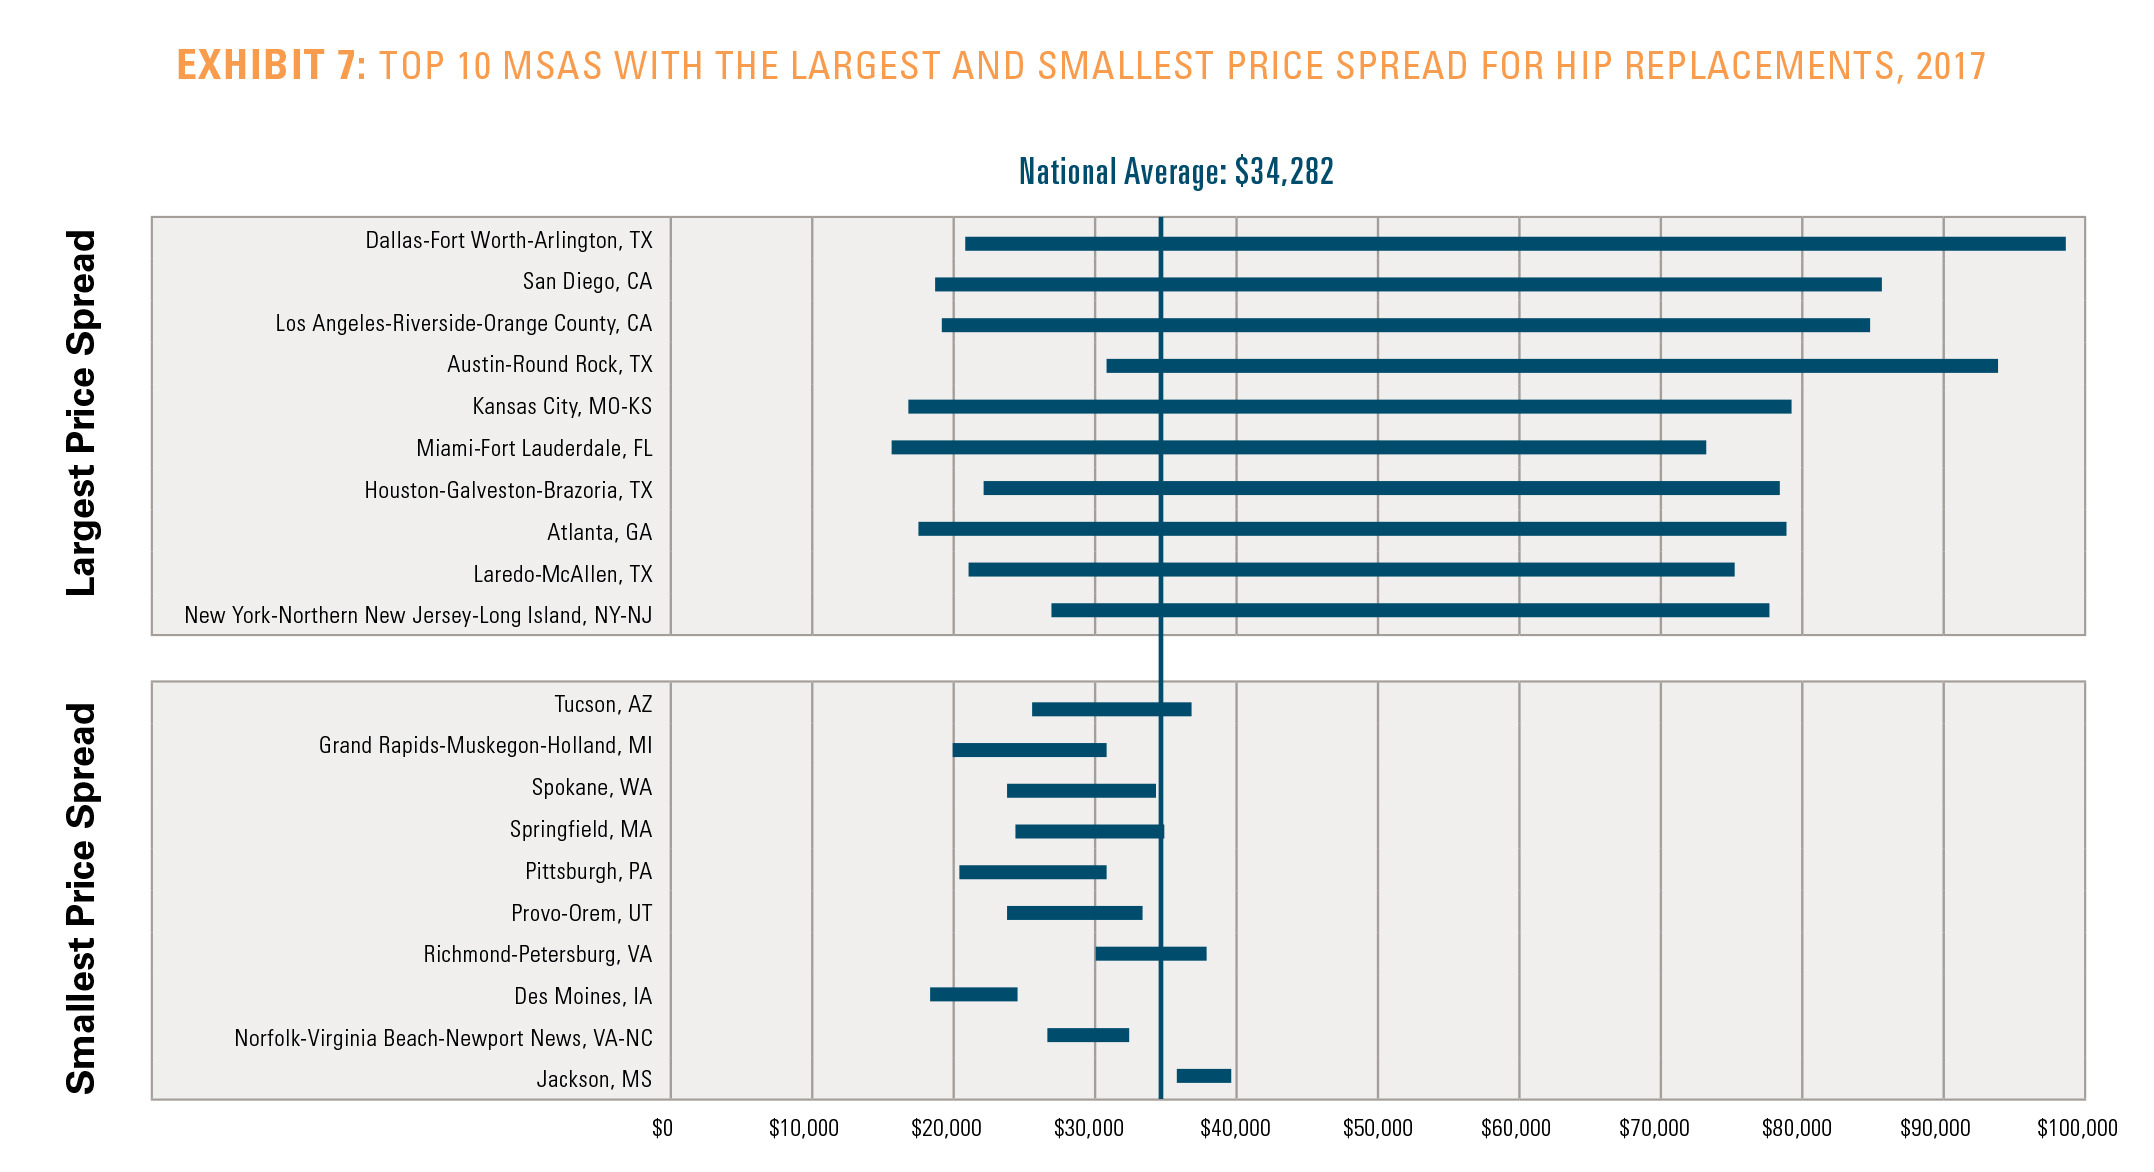 EXHIBIT 7: TOP 10 MSAS WITH THE LARGEST AND SMALLEST PRICE SPREAD FOR HIP REPLACEMENTS, 2017